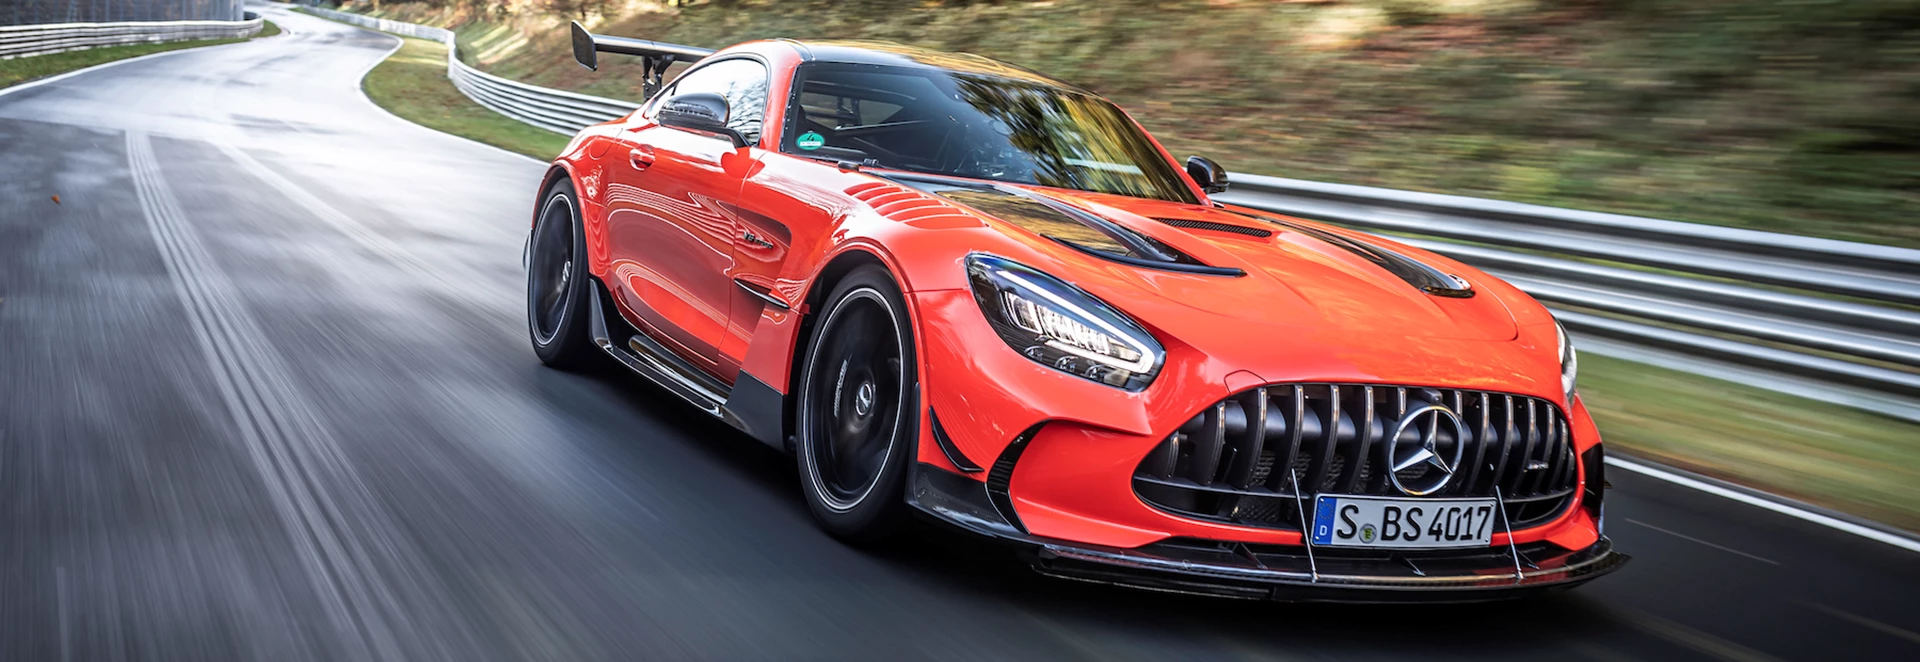 Mercedes-AMG GT Black Series sets new Nurburgring lap record at famous circuit 